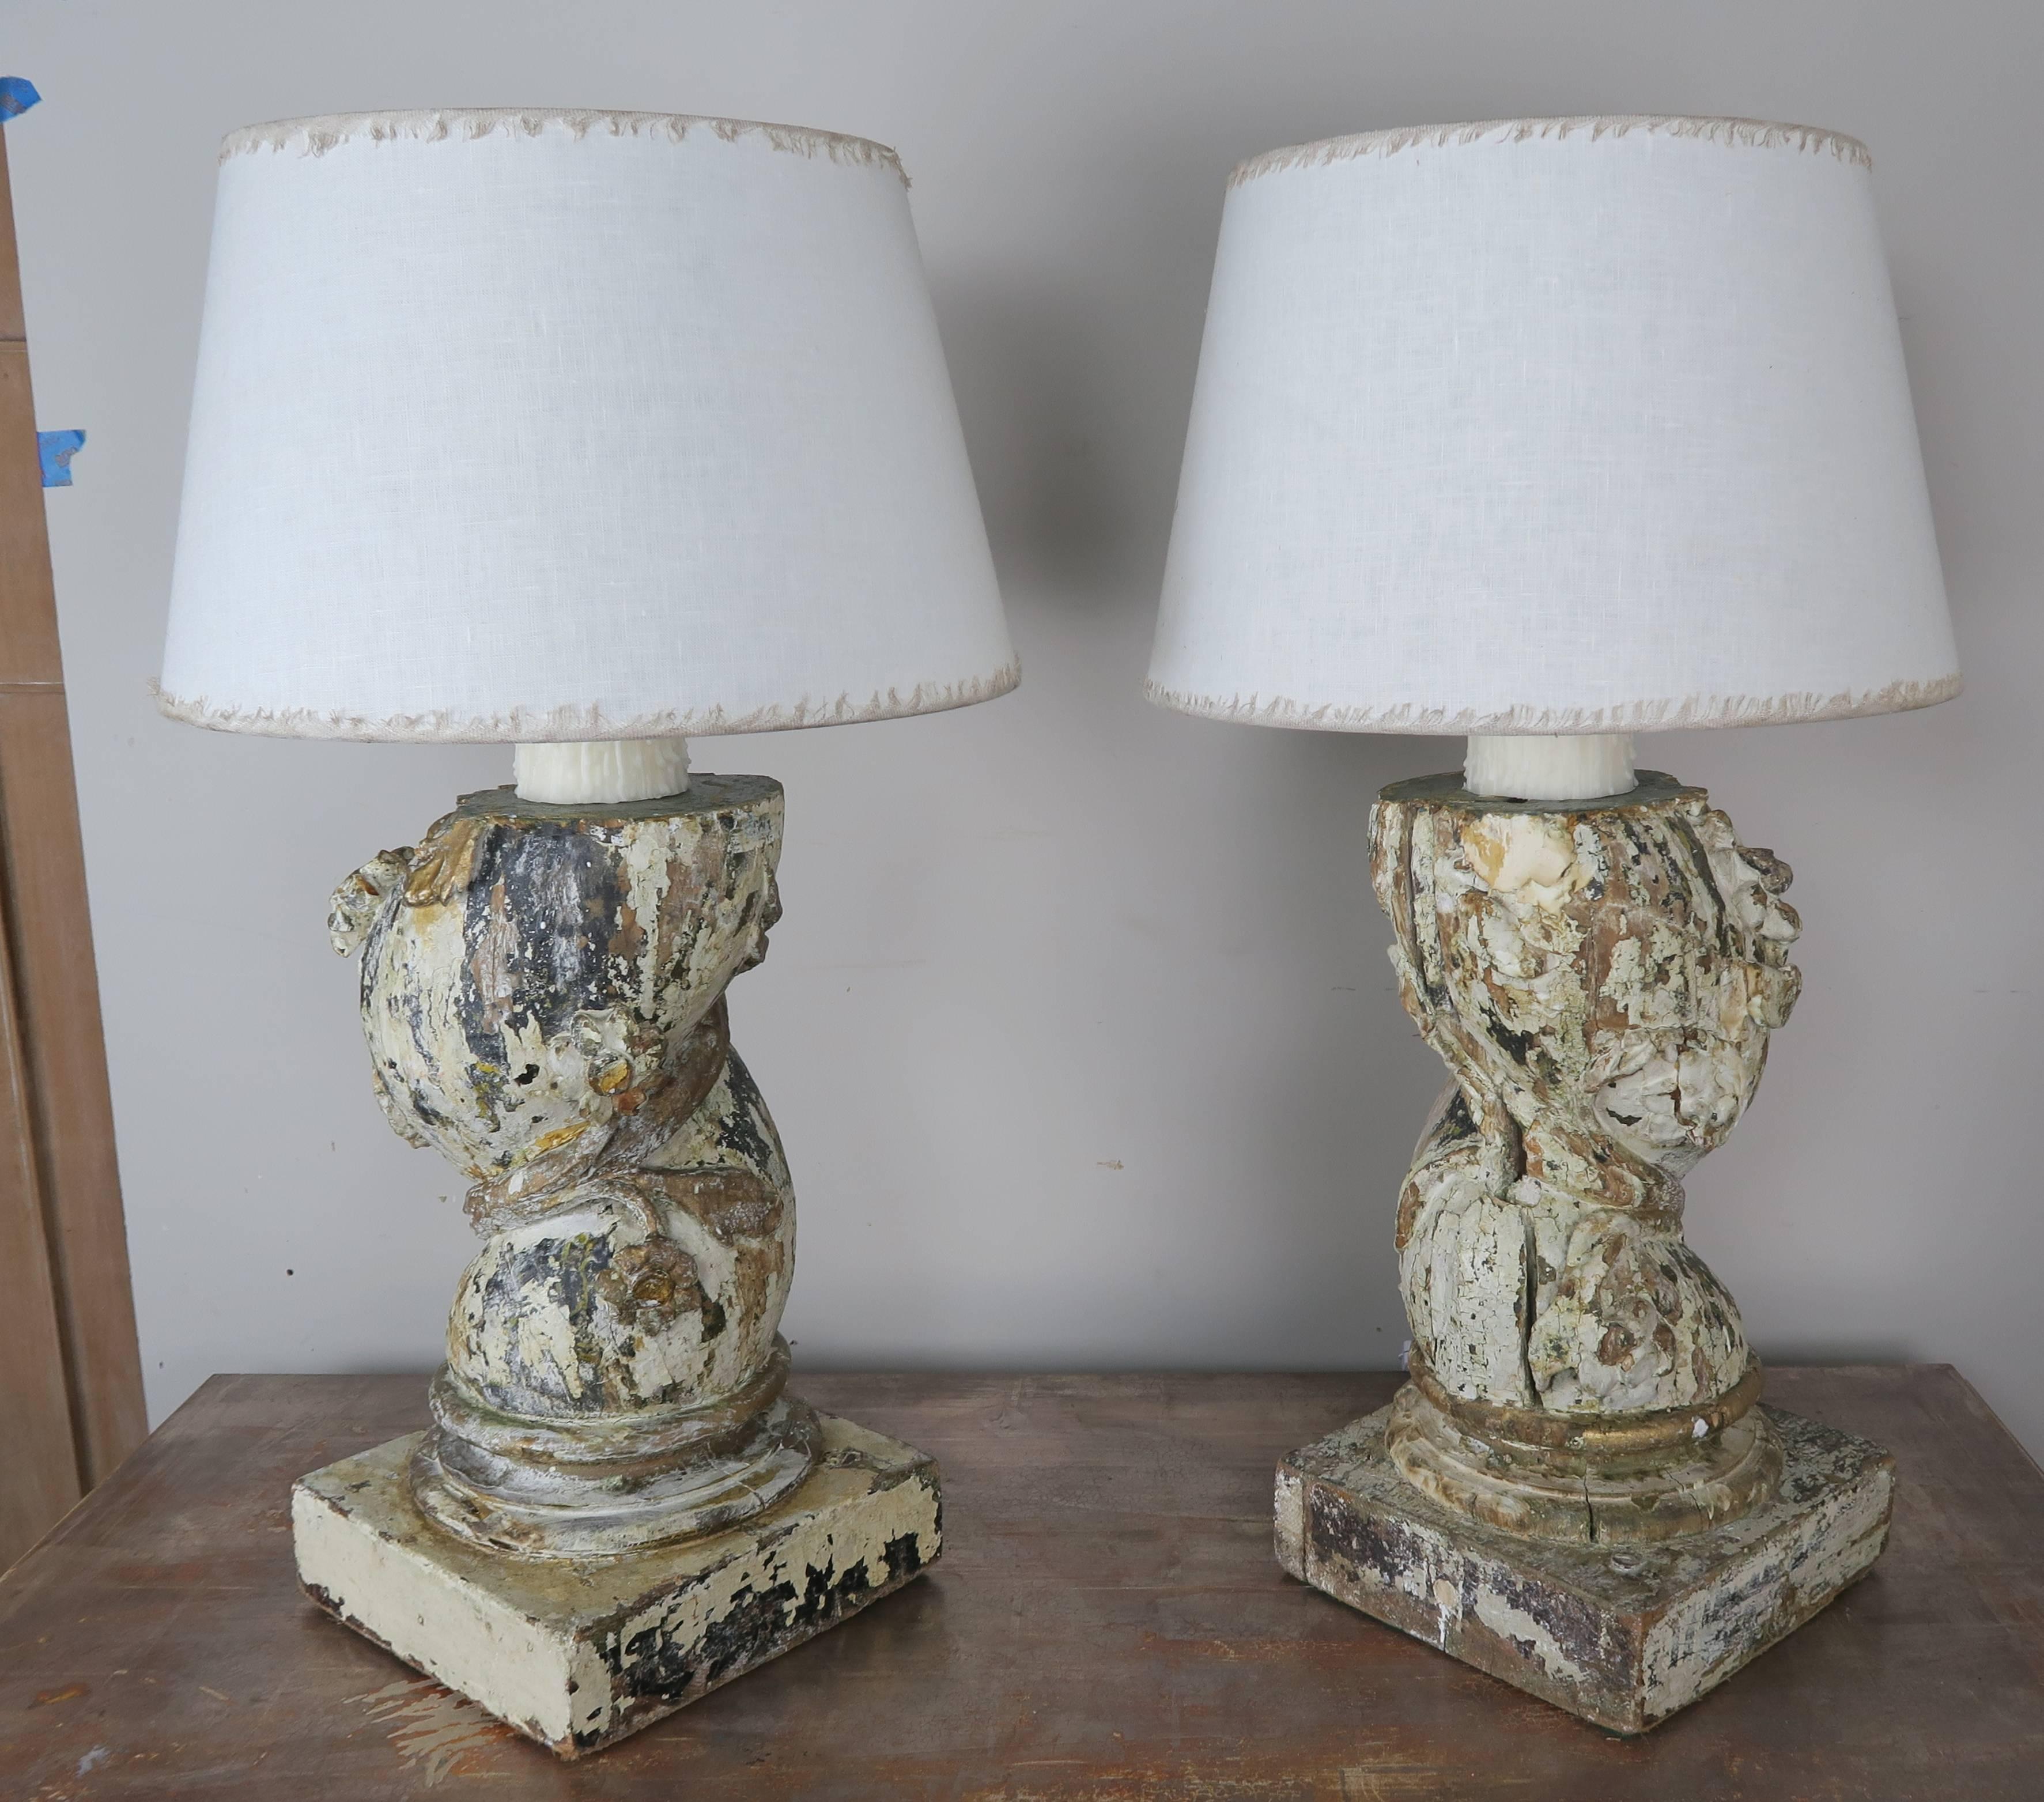 Pair of 19th century Italian carved painted capital fragments that have been mounted into lamps with drip wax candles. The lamps are crowned with white linen shades with eye lash fringe detail.
Shade size: 16